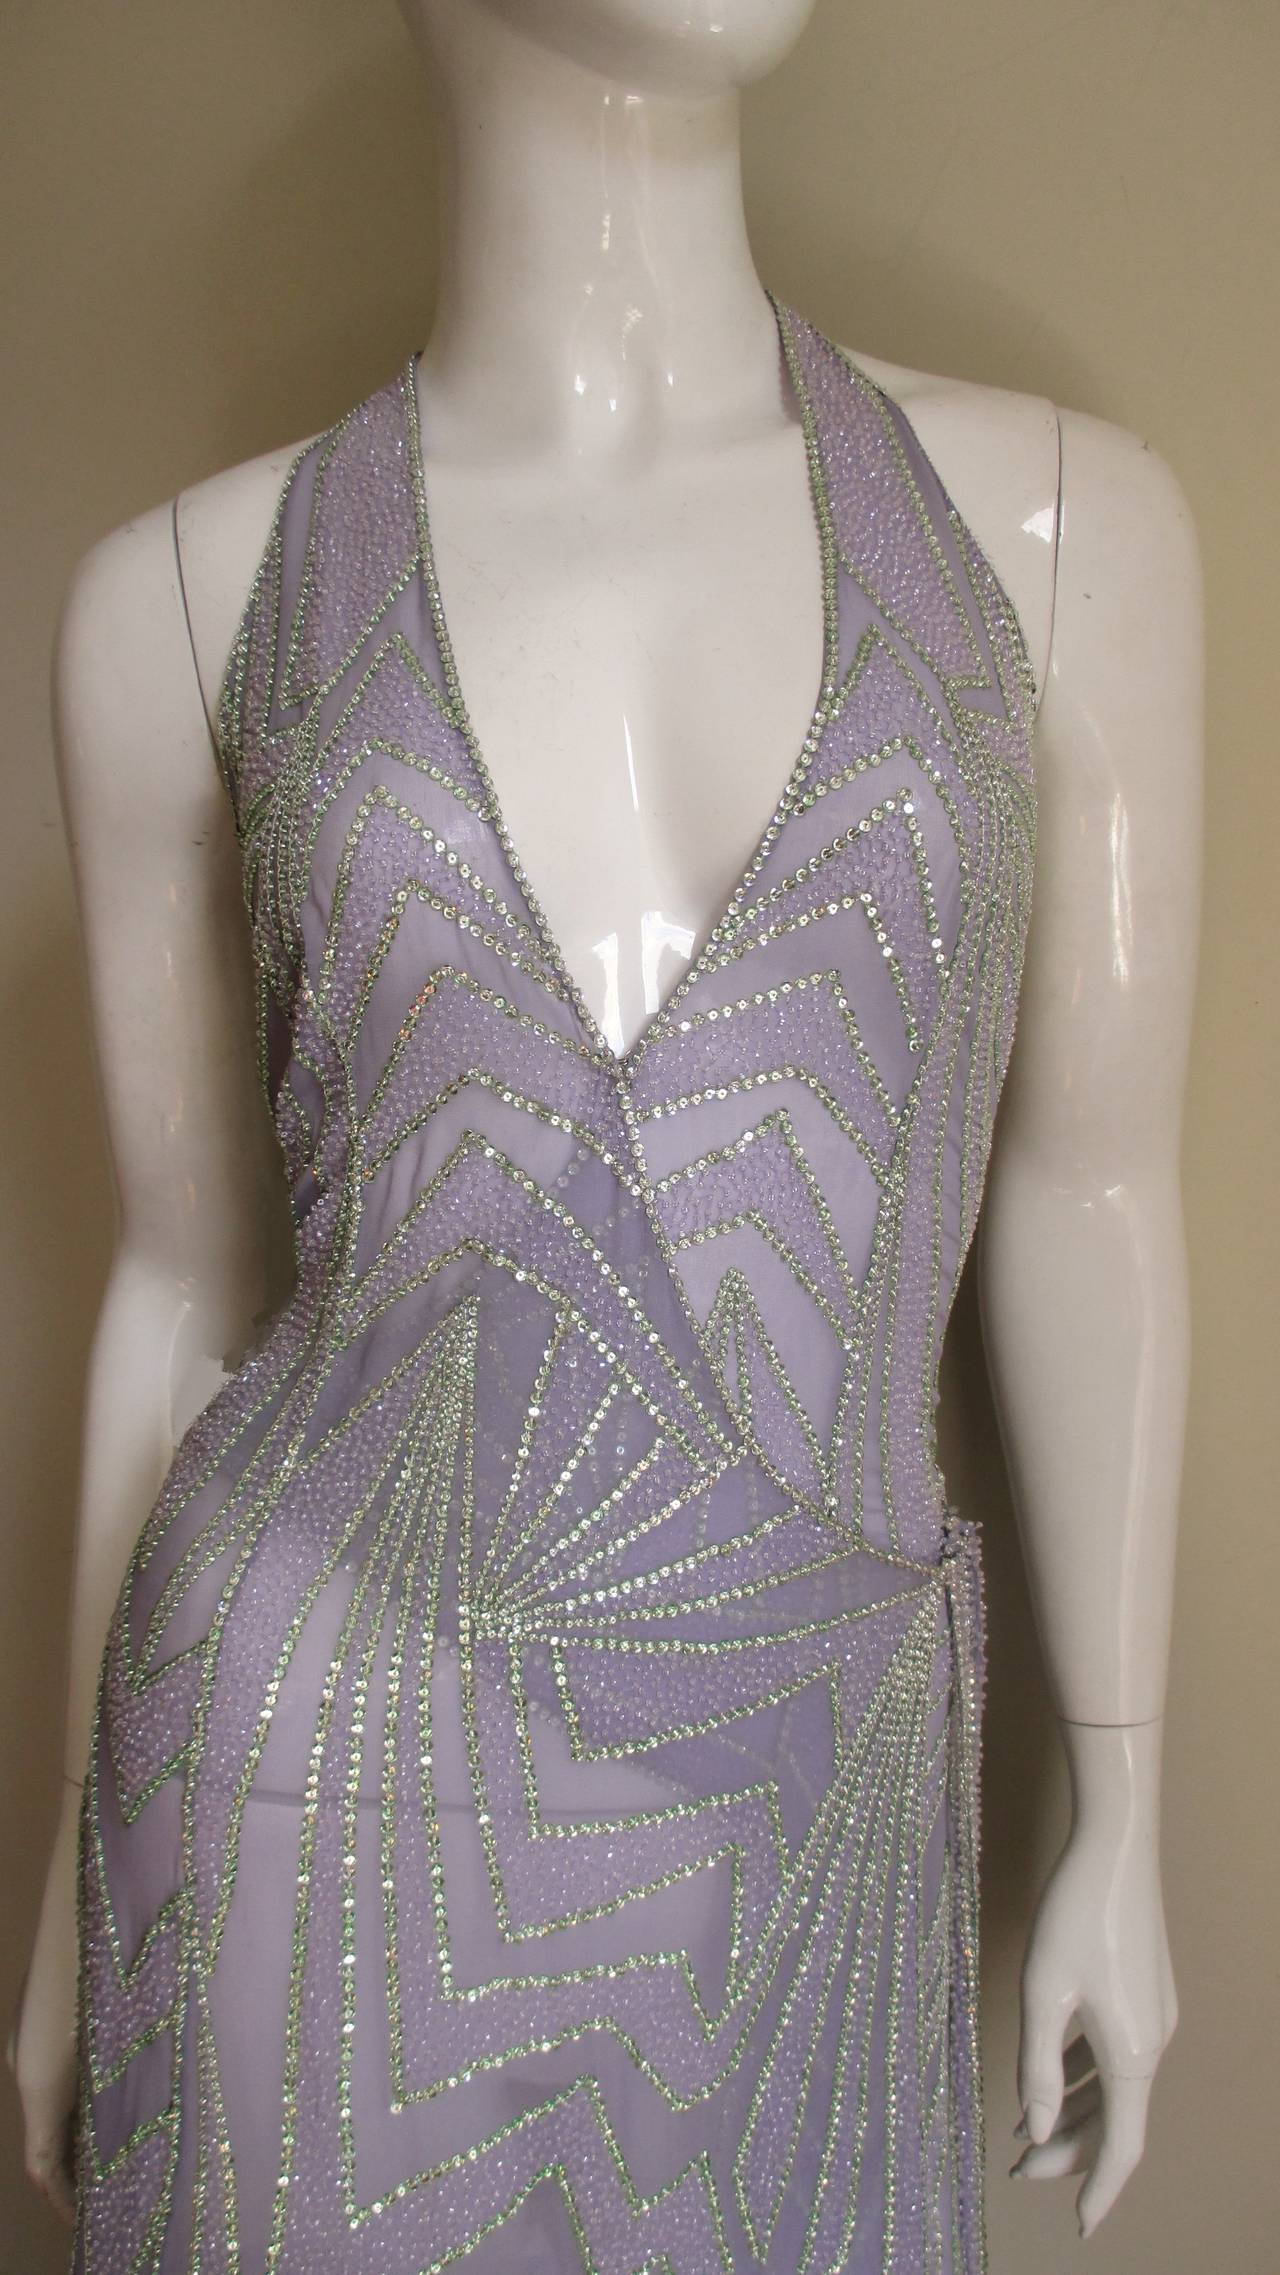 Exquisitely detailed beaded, sequin silk dress from Gianni Versace Couture. It is a plunging neck halter wrap style in a beautiful abstract pattern of lines and angles on pale lilac semi sheer silk outlined with pale green sequins, the areas in